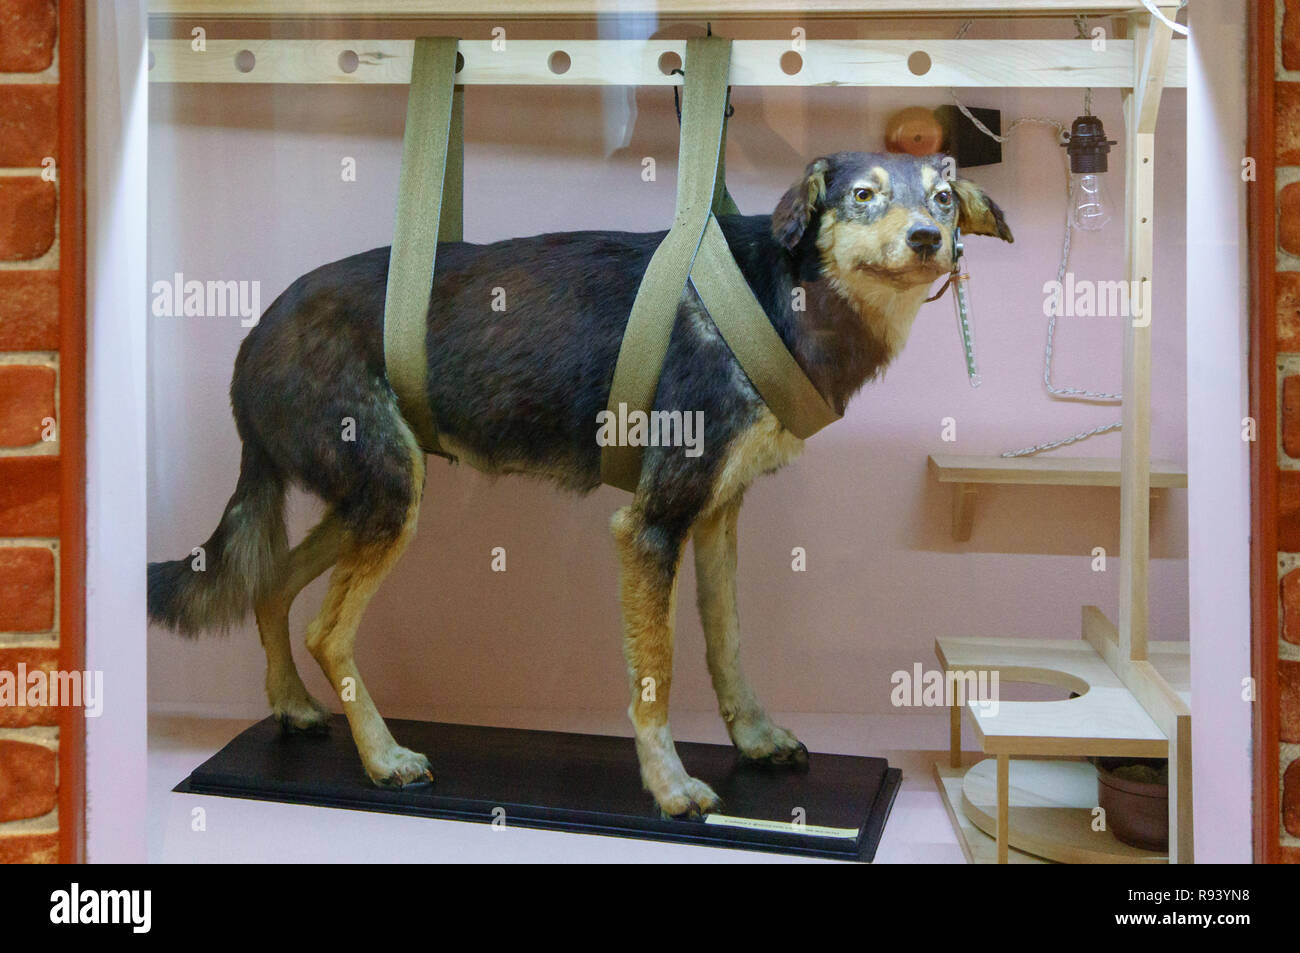 Ryazan, Russia - August 19, 2018: Stuffed dogs in Pavlov museum. Pavlov's experiments with dogs demonstrated that our behavior can be changed using co Stock Photo